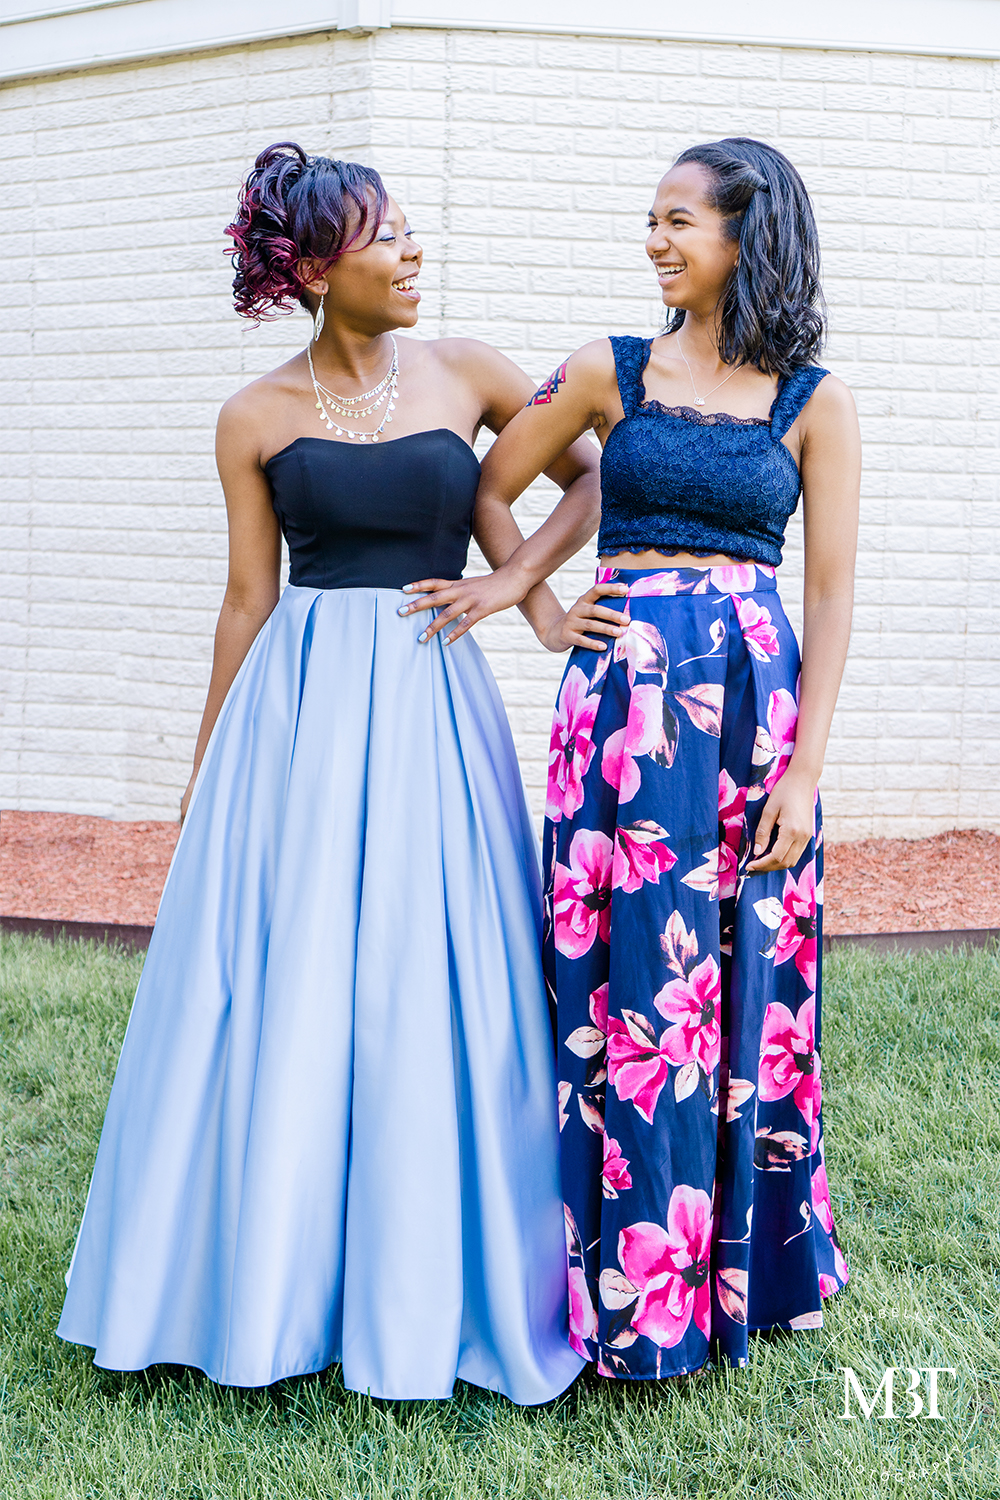 best friends smiling & looking at each other with their arms linked, taken on their prom night at a backyard in Fairfax, Virginia taken by a Northern Virginia portrait photographer